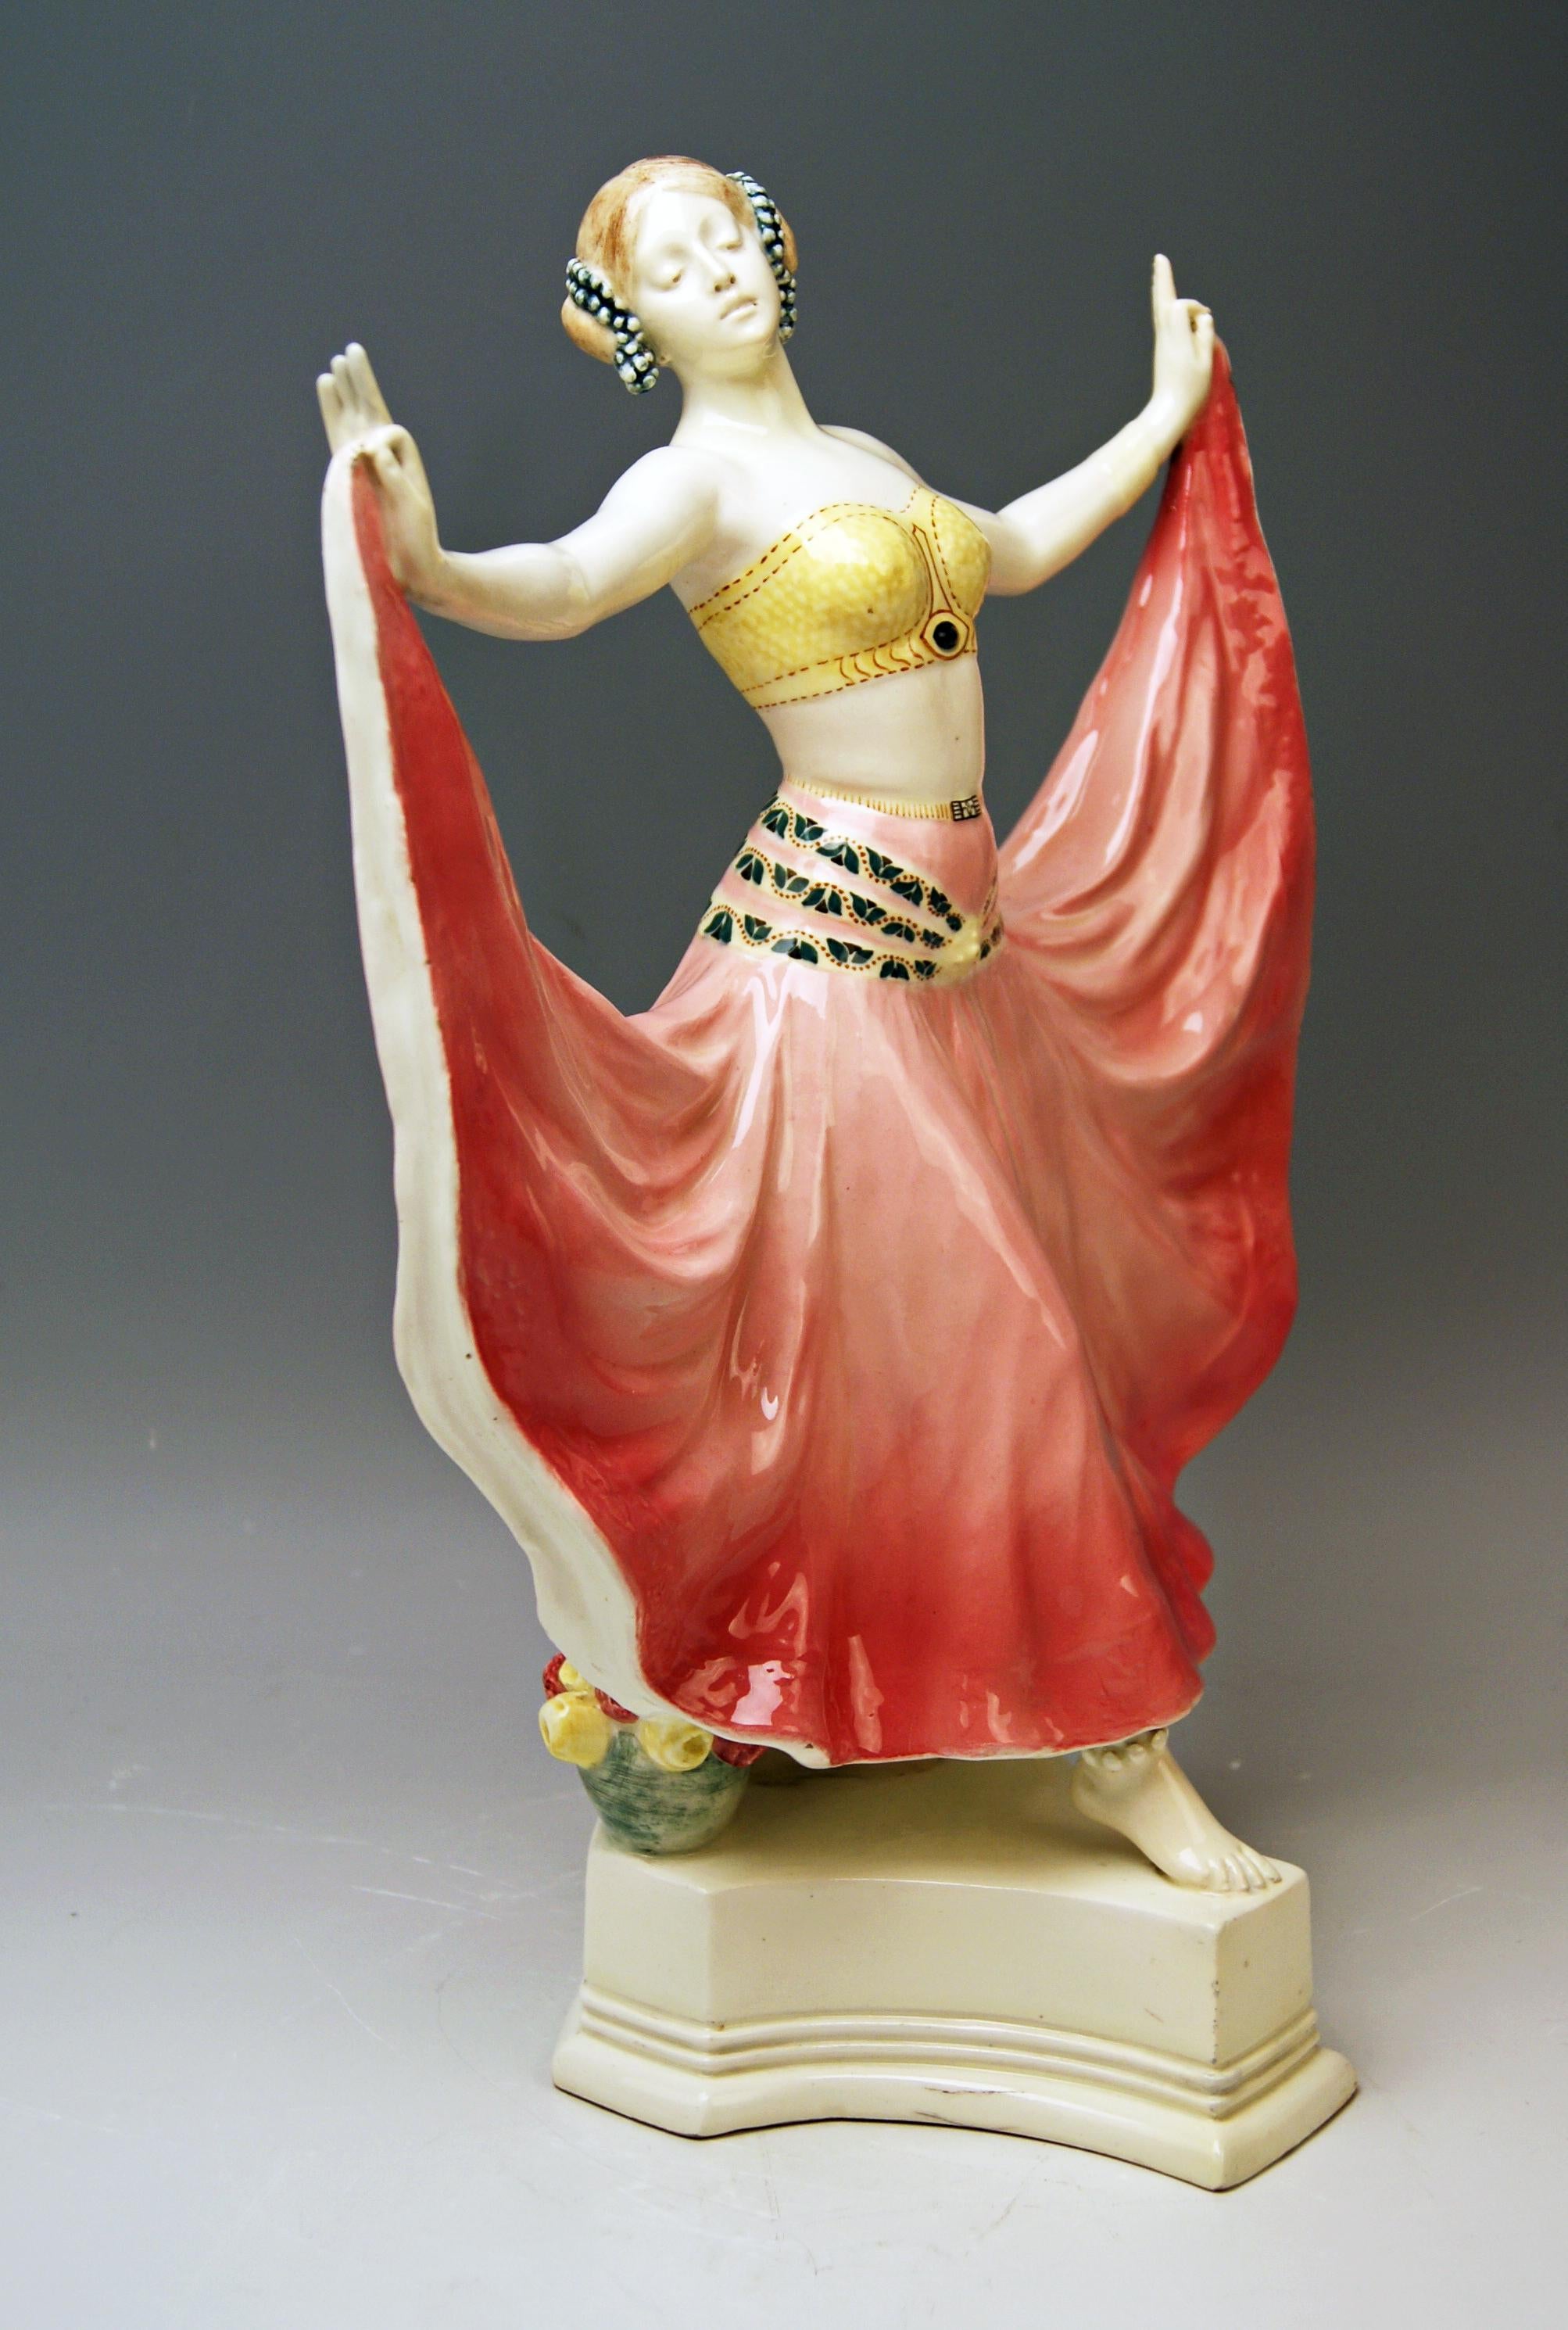 Goldscheider Vienna stunning figurine: Lady dancer called Ruth

Designer:
Rosé (Pseudonym / Stanislaus Czapek ?)
A very important designer having been active for Goldscheider manufactory in period of 1912-1930 / this pseudonym is visible on many